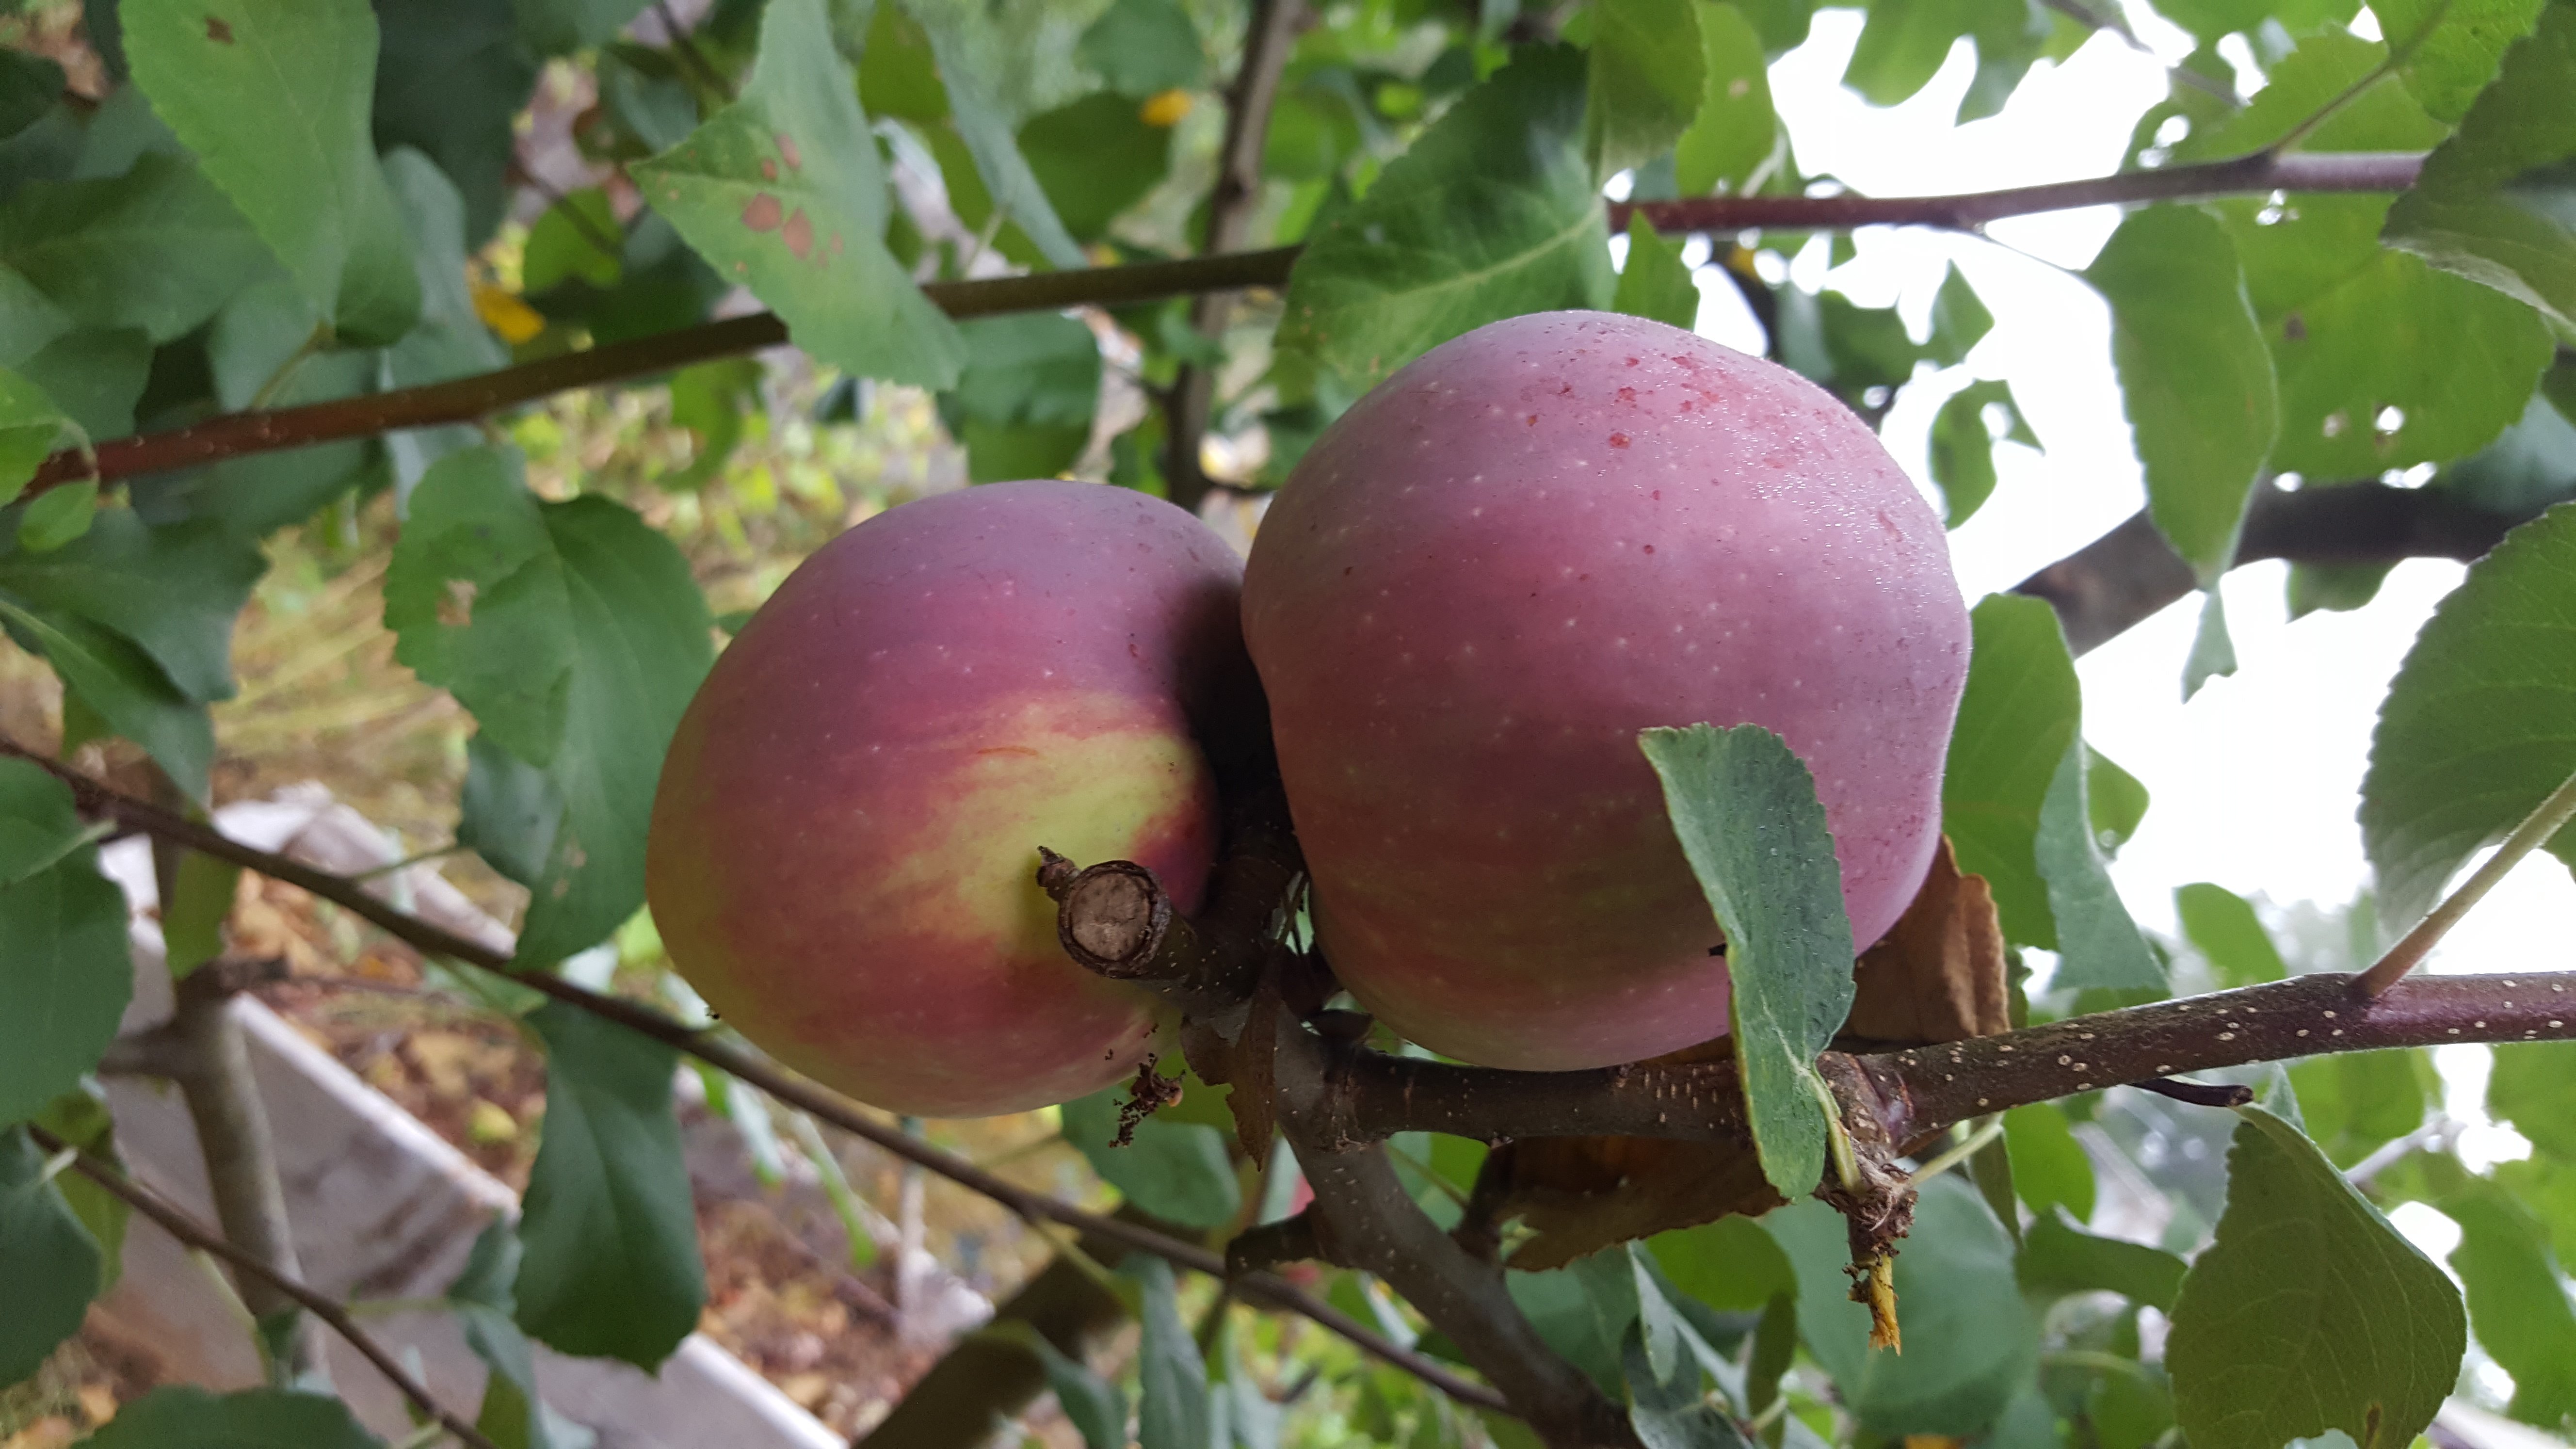 "I used the fertile mulching treatment (Garden Information Leaflet #4) on two apple trees and they are happier than they've ever been. They've been diseased and bug-ridden about seven years before that. I tried dormant spray, etc. That helped, but not like this."